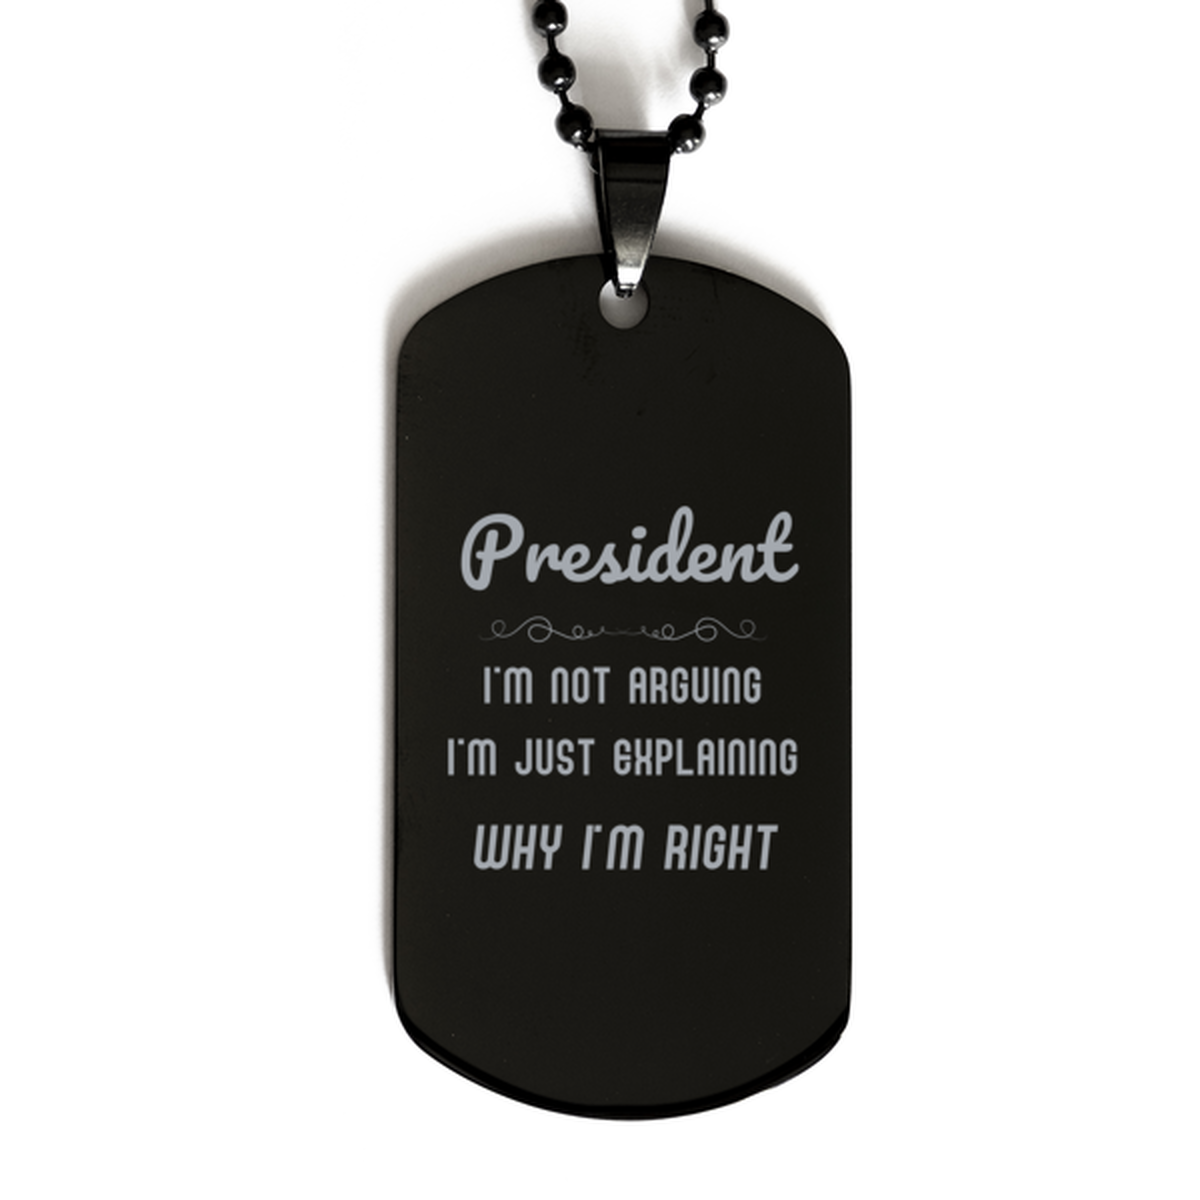 President I'm not Arguing. I'm Just Explaining Why I'm RIGHT Black Dog Tag, Funny Saying Quote President Gifts For President Graduation Birthday Christmas Gifts for Men Women Coworker